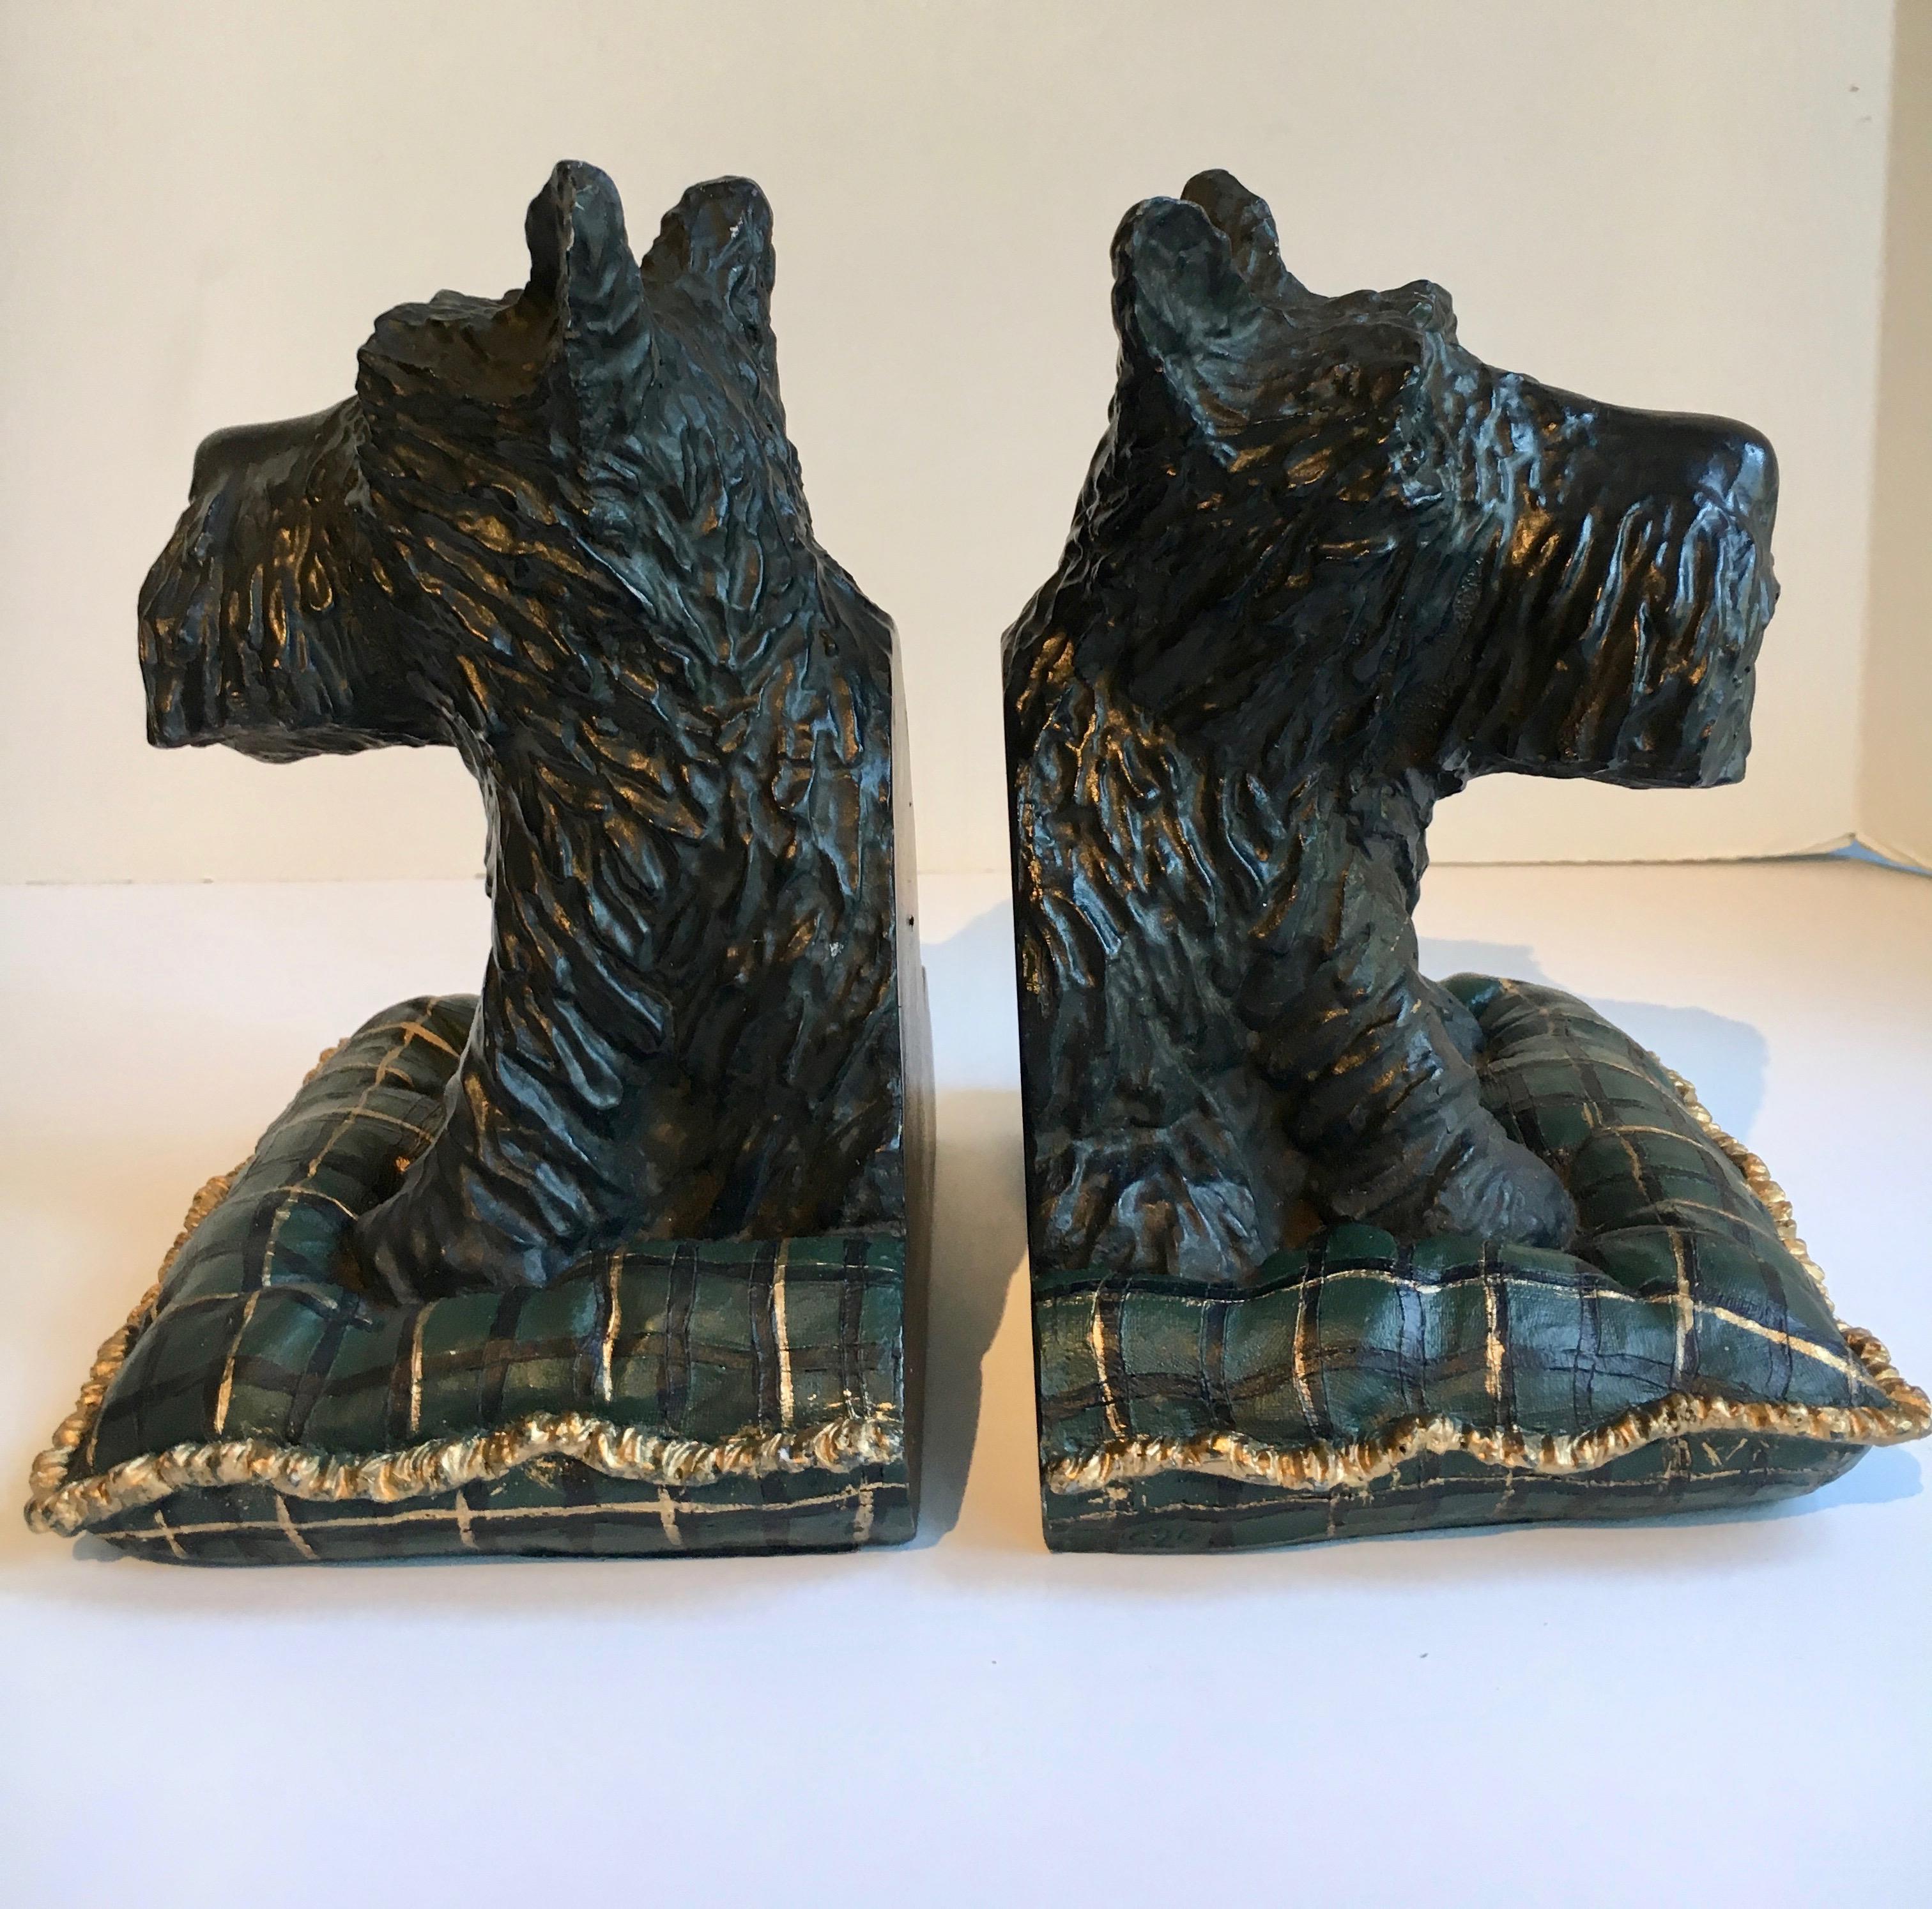 Pair or Scottie dog bookends, a handsome pair of Scotties on a plaid pillow - perfect for the dog lover and especially for those with Scotties or a best friend named Scott, bagpipes not included.



    